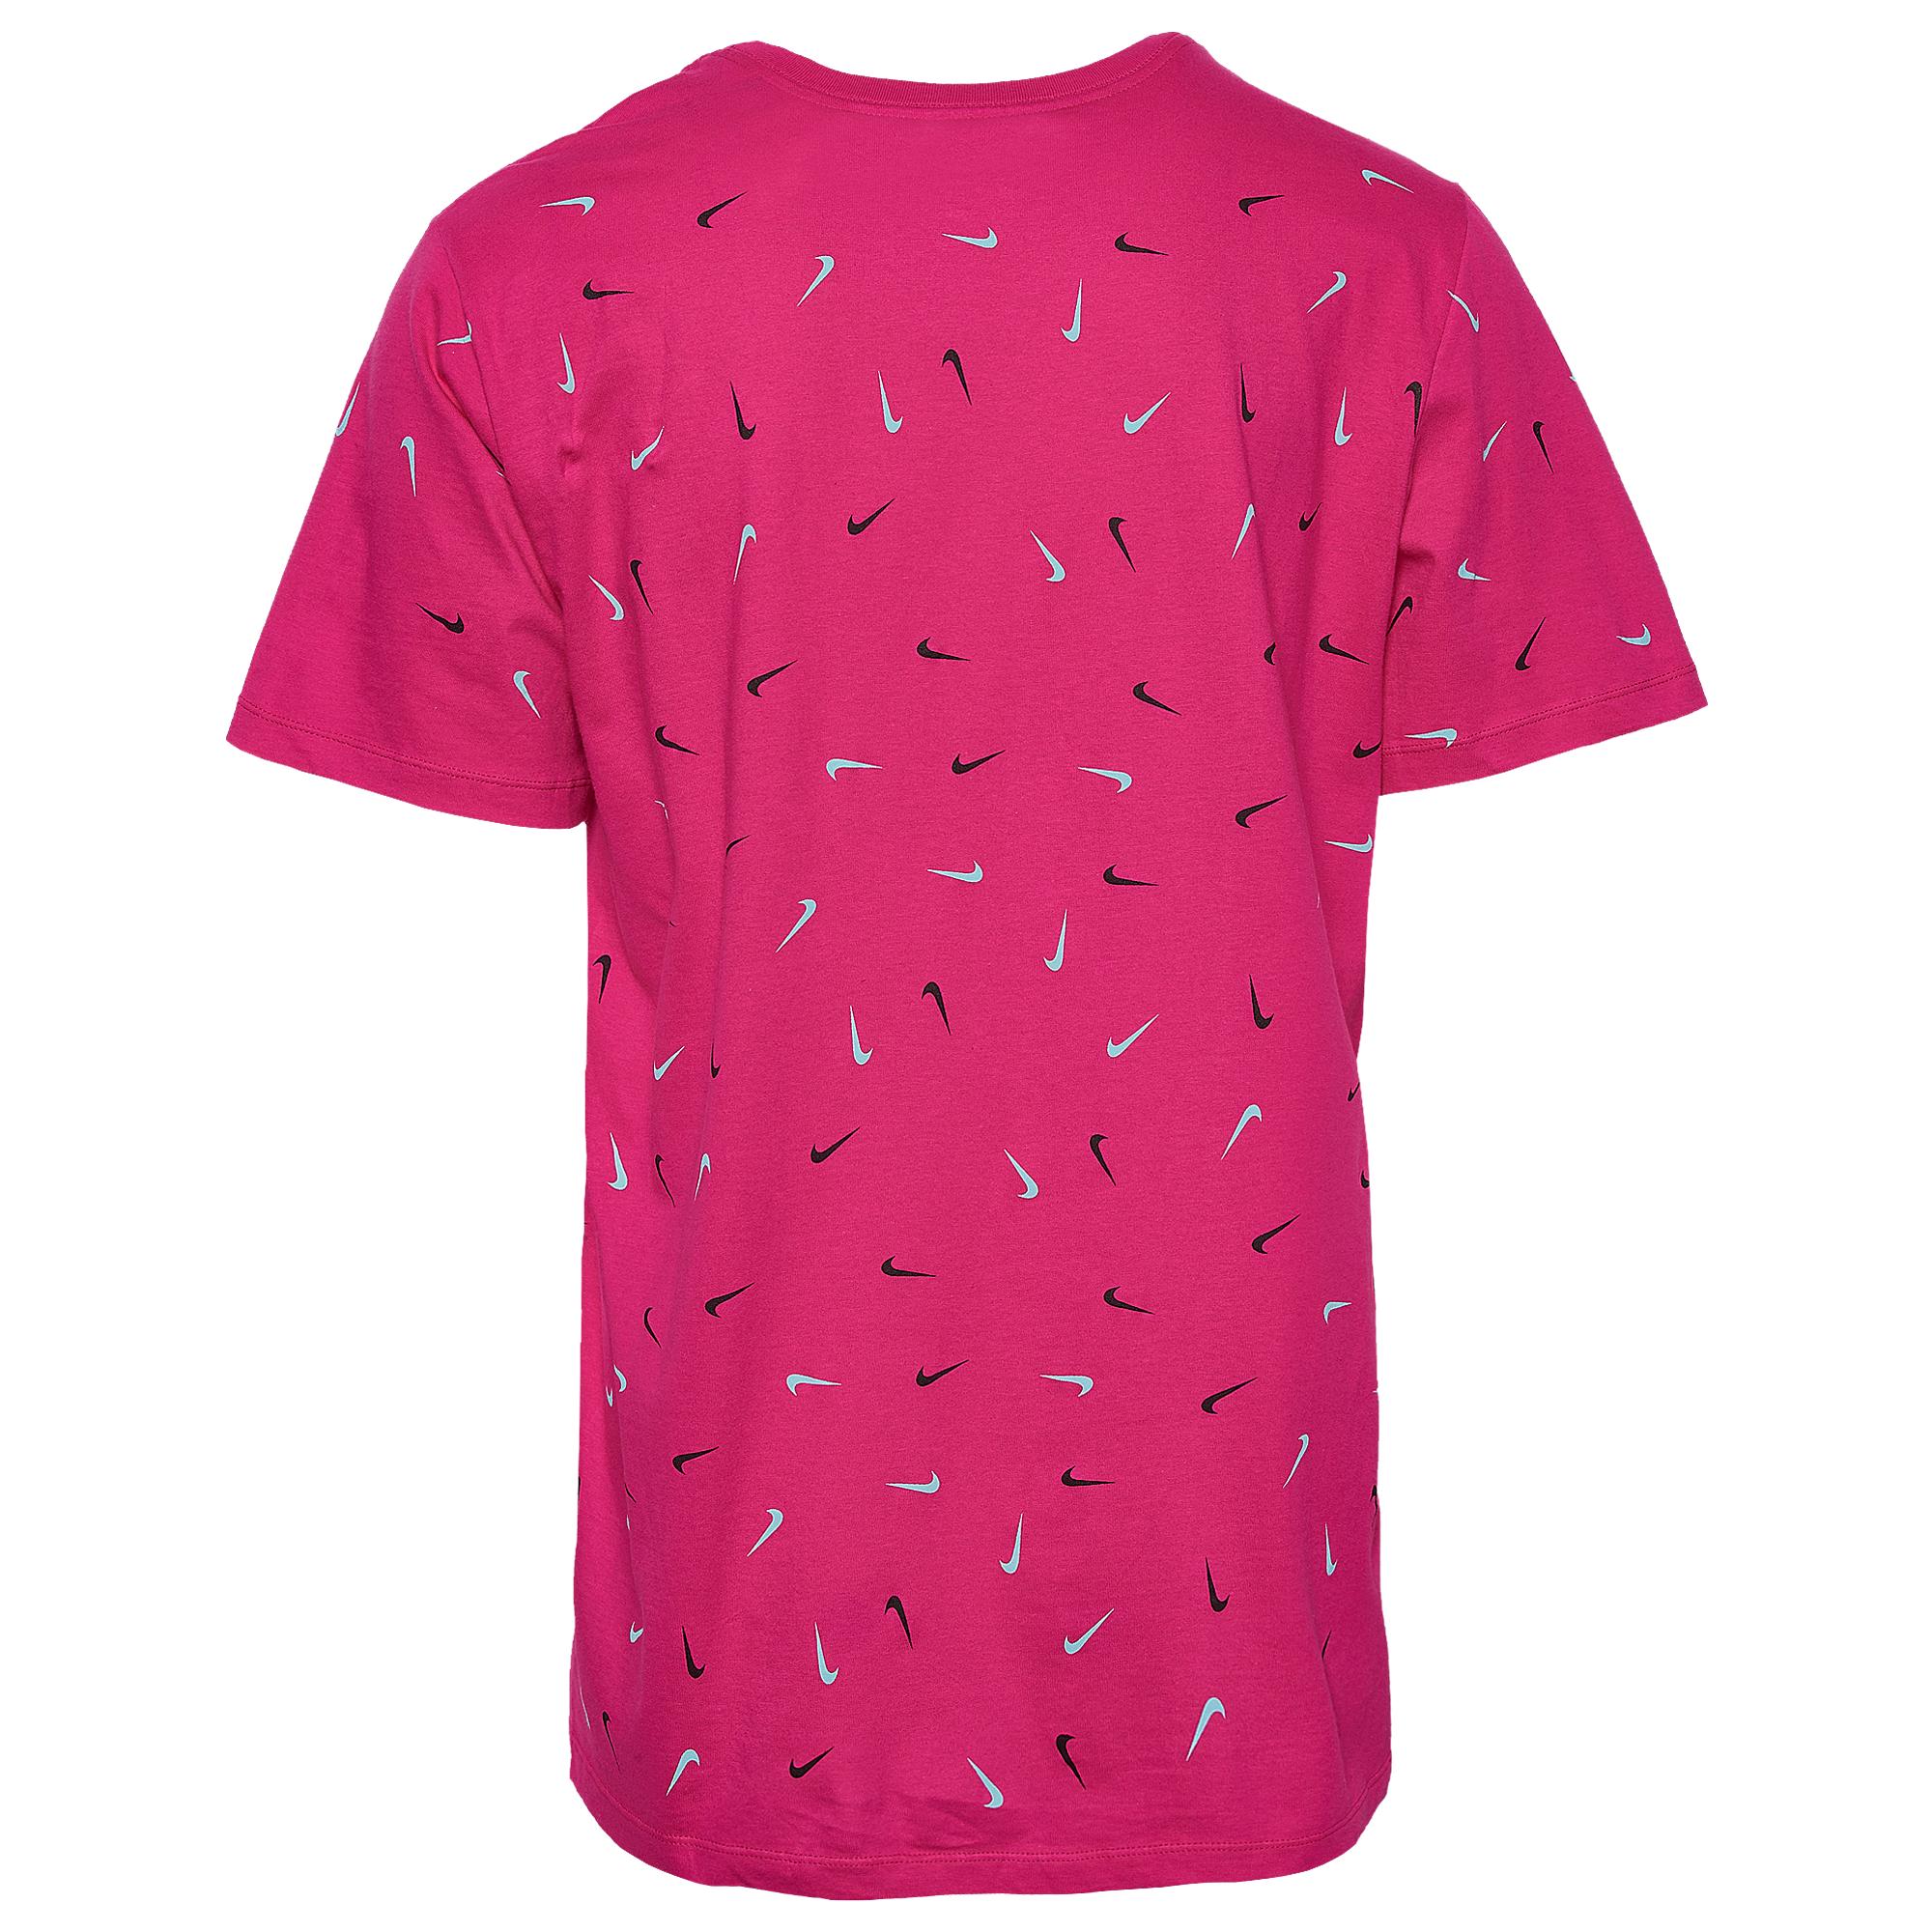 Nike Cotton Miami T-shirt in Pink for Men - Lyst